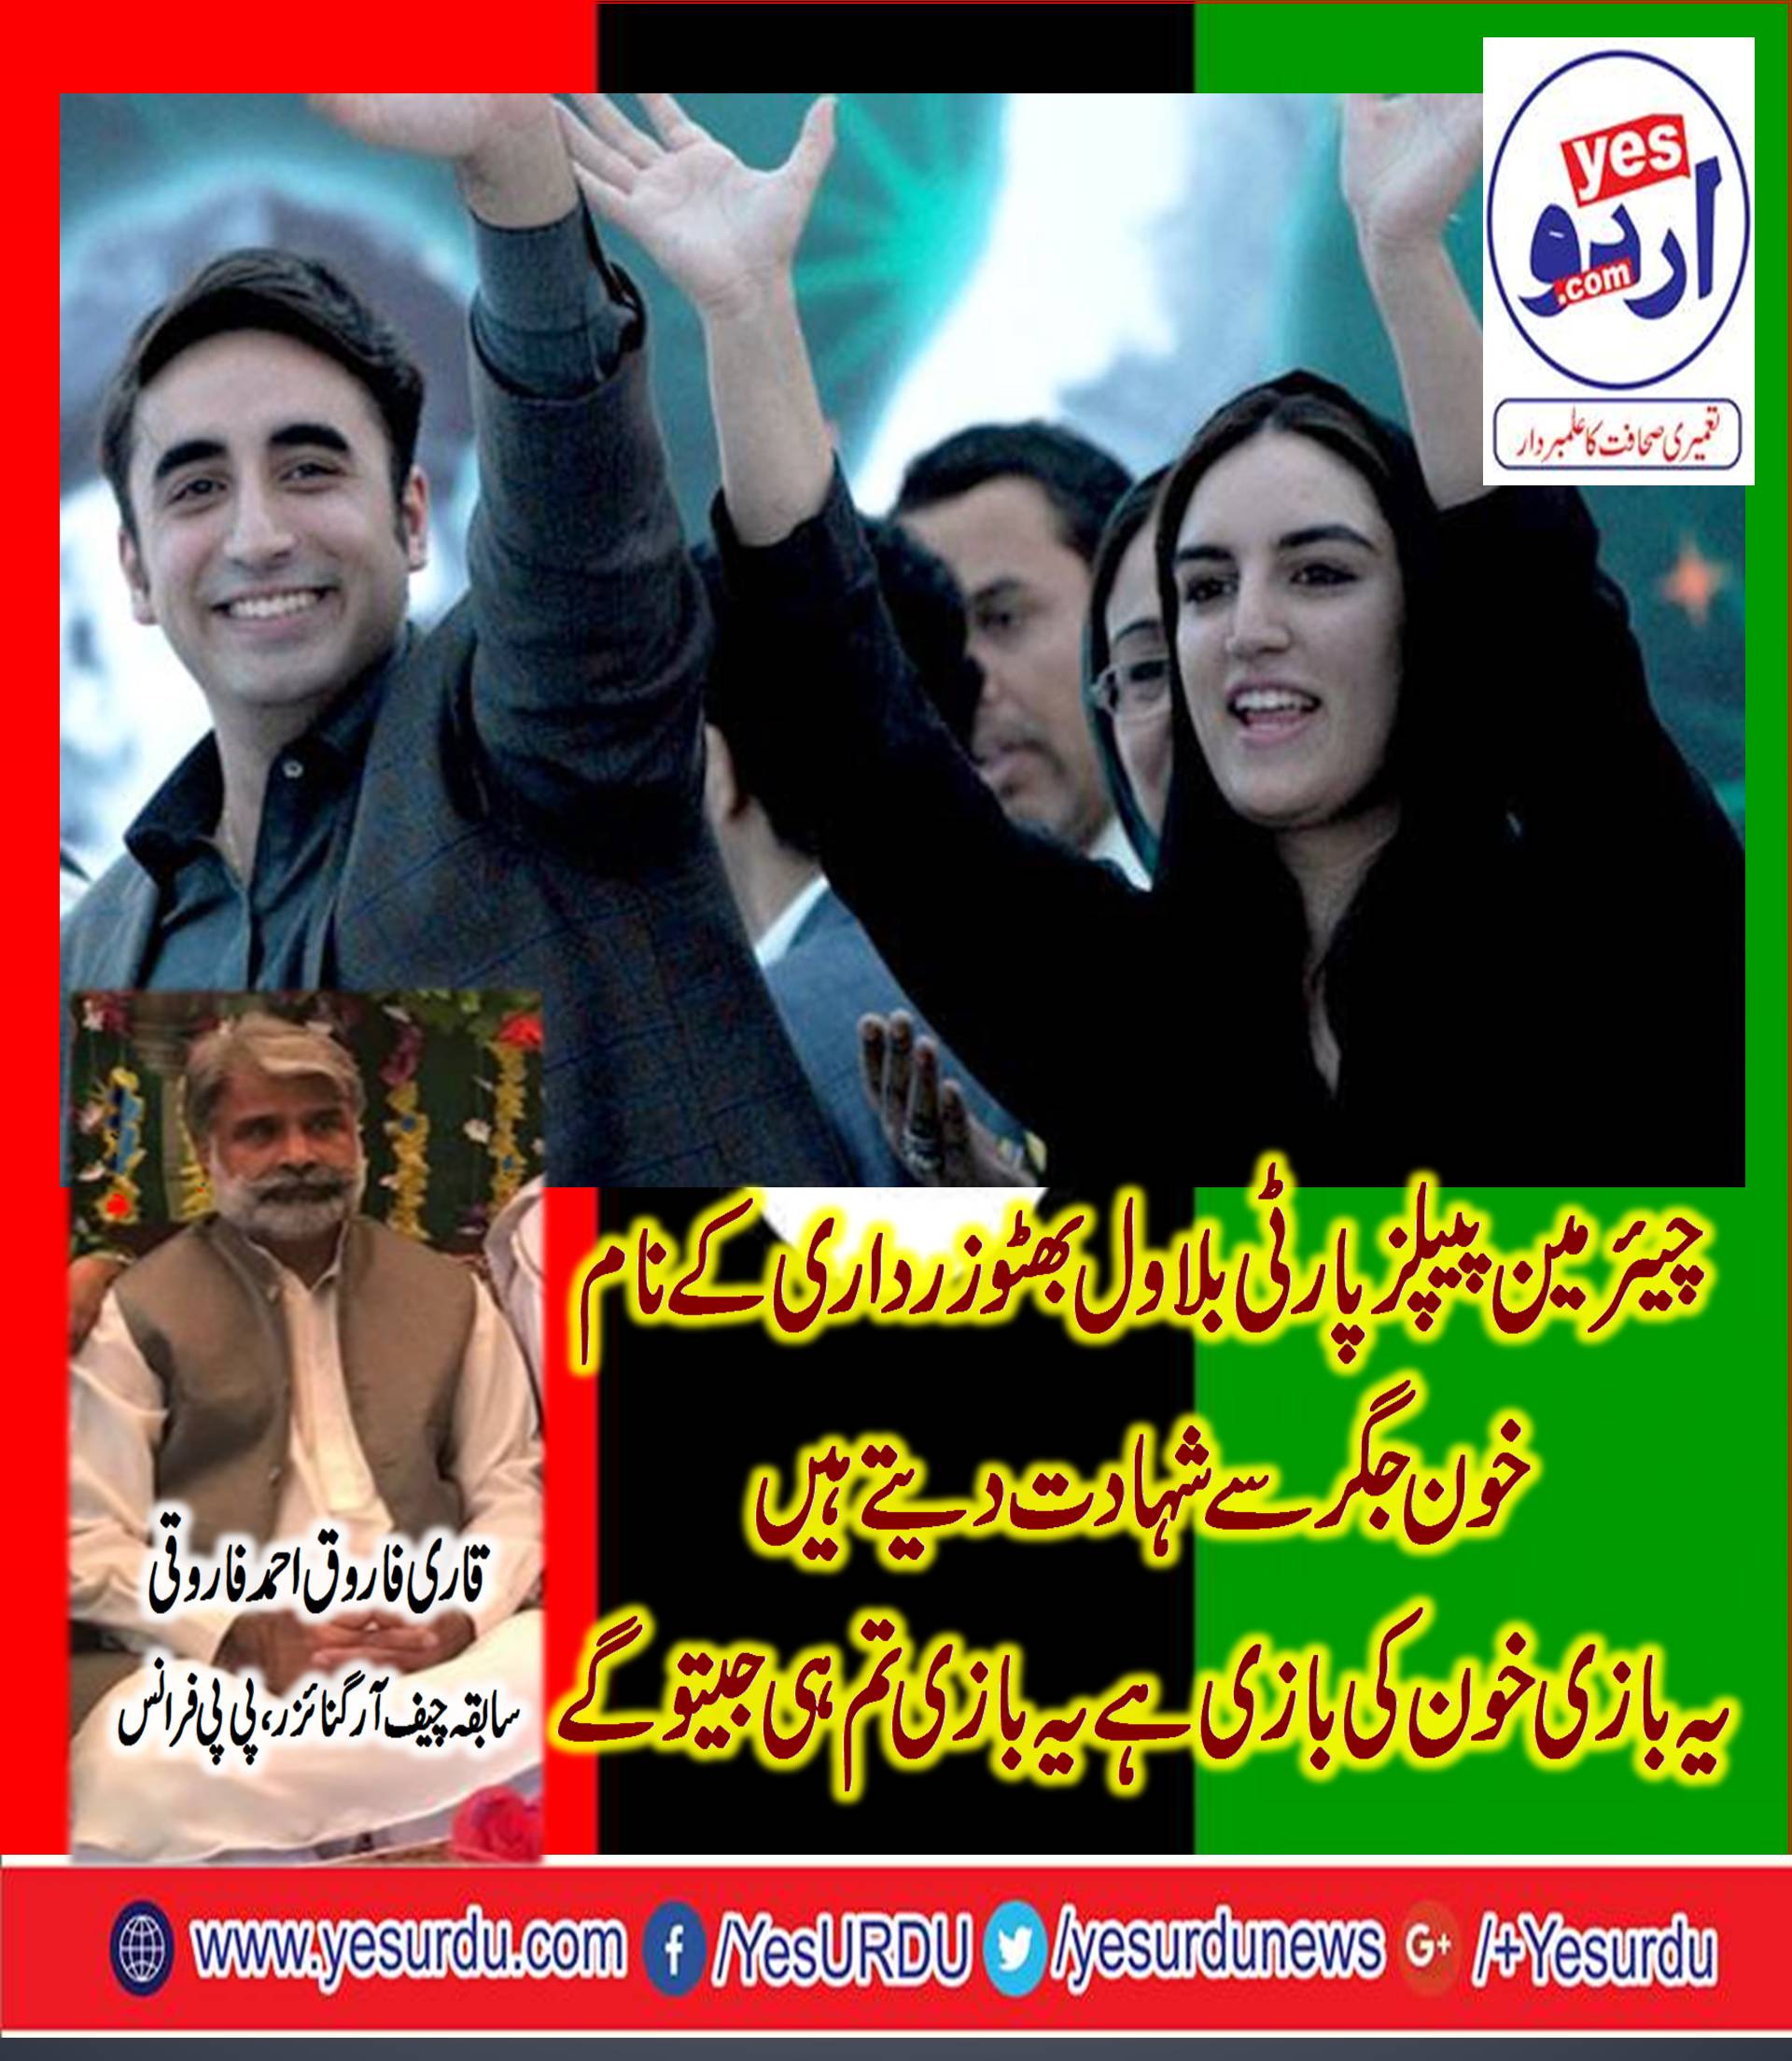 The PPP will celebrate the ground in Islamabad today